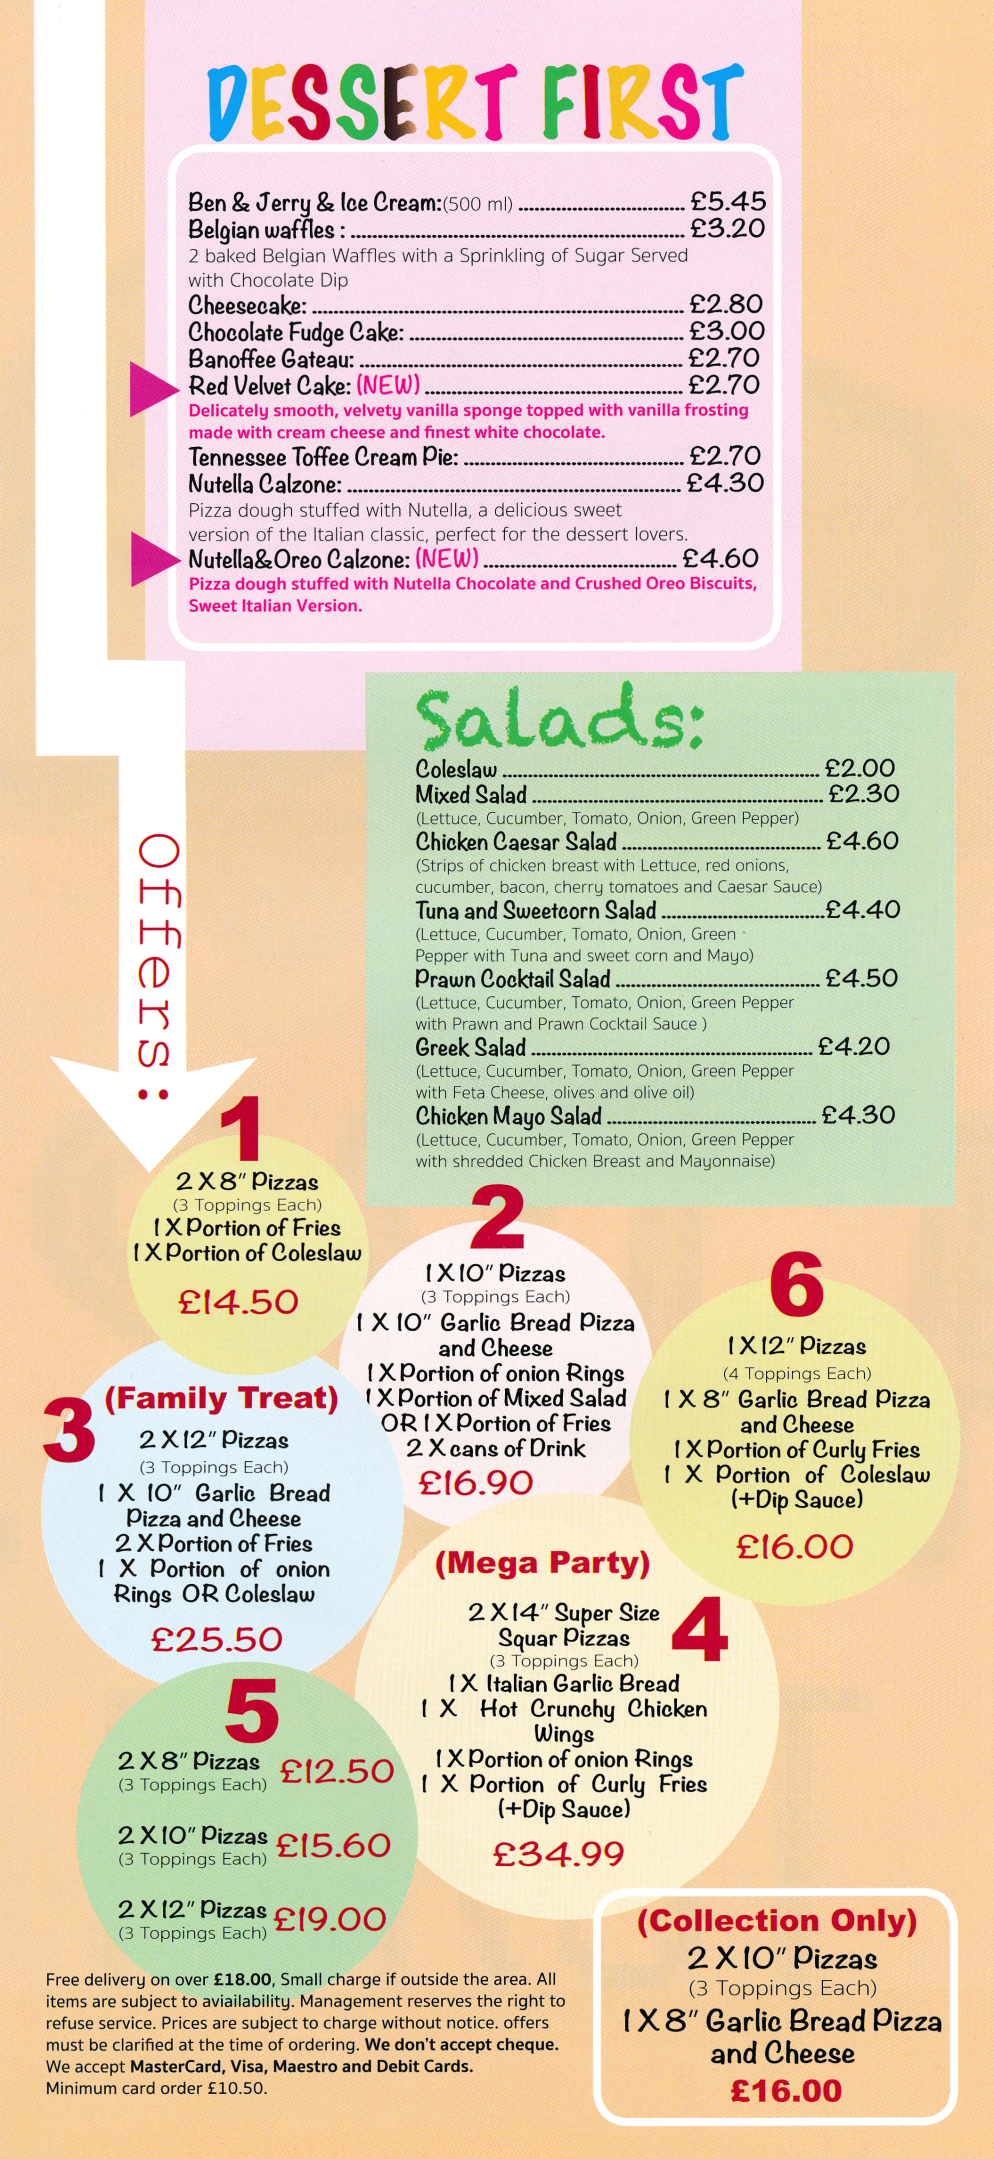 Menu for Pizza Town takeaway and delivery in Hucknall, Nottingham